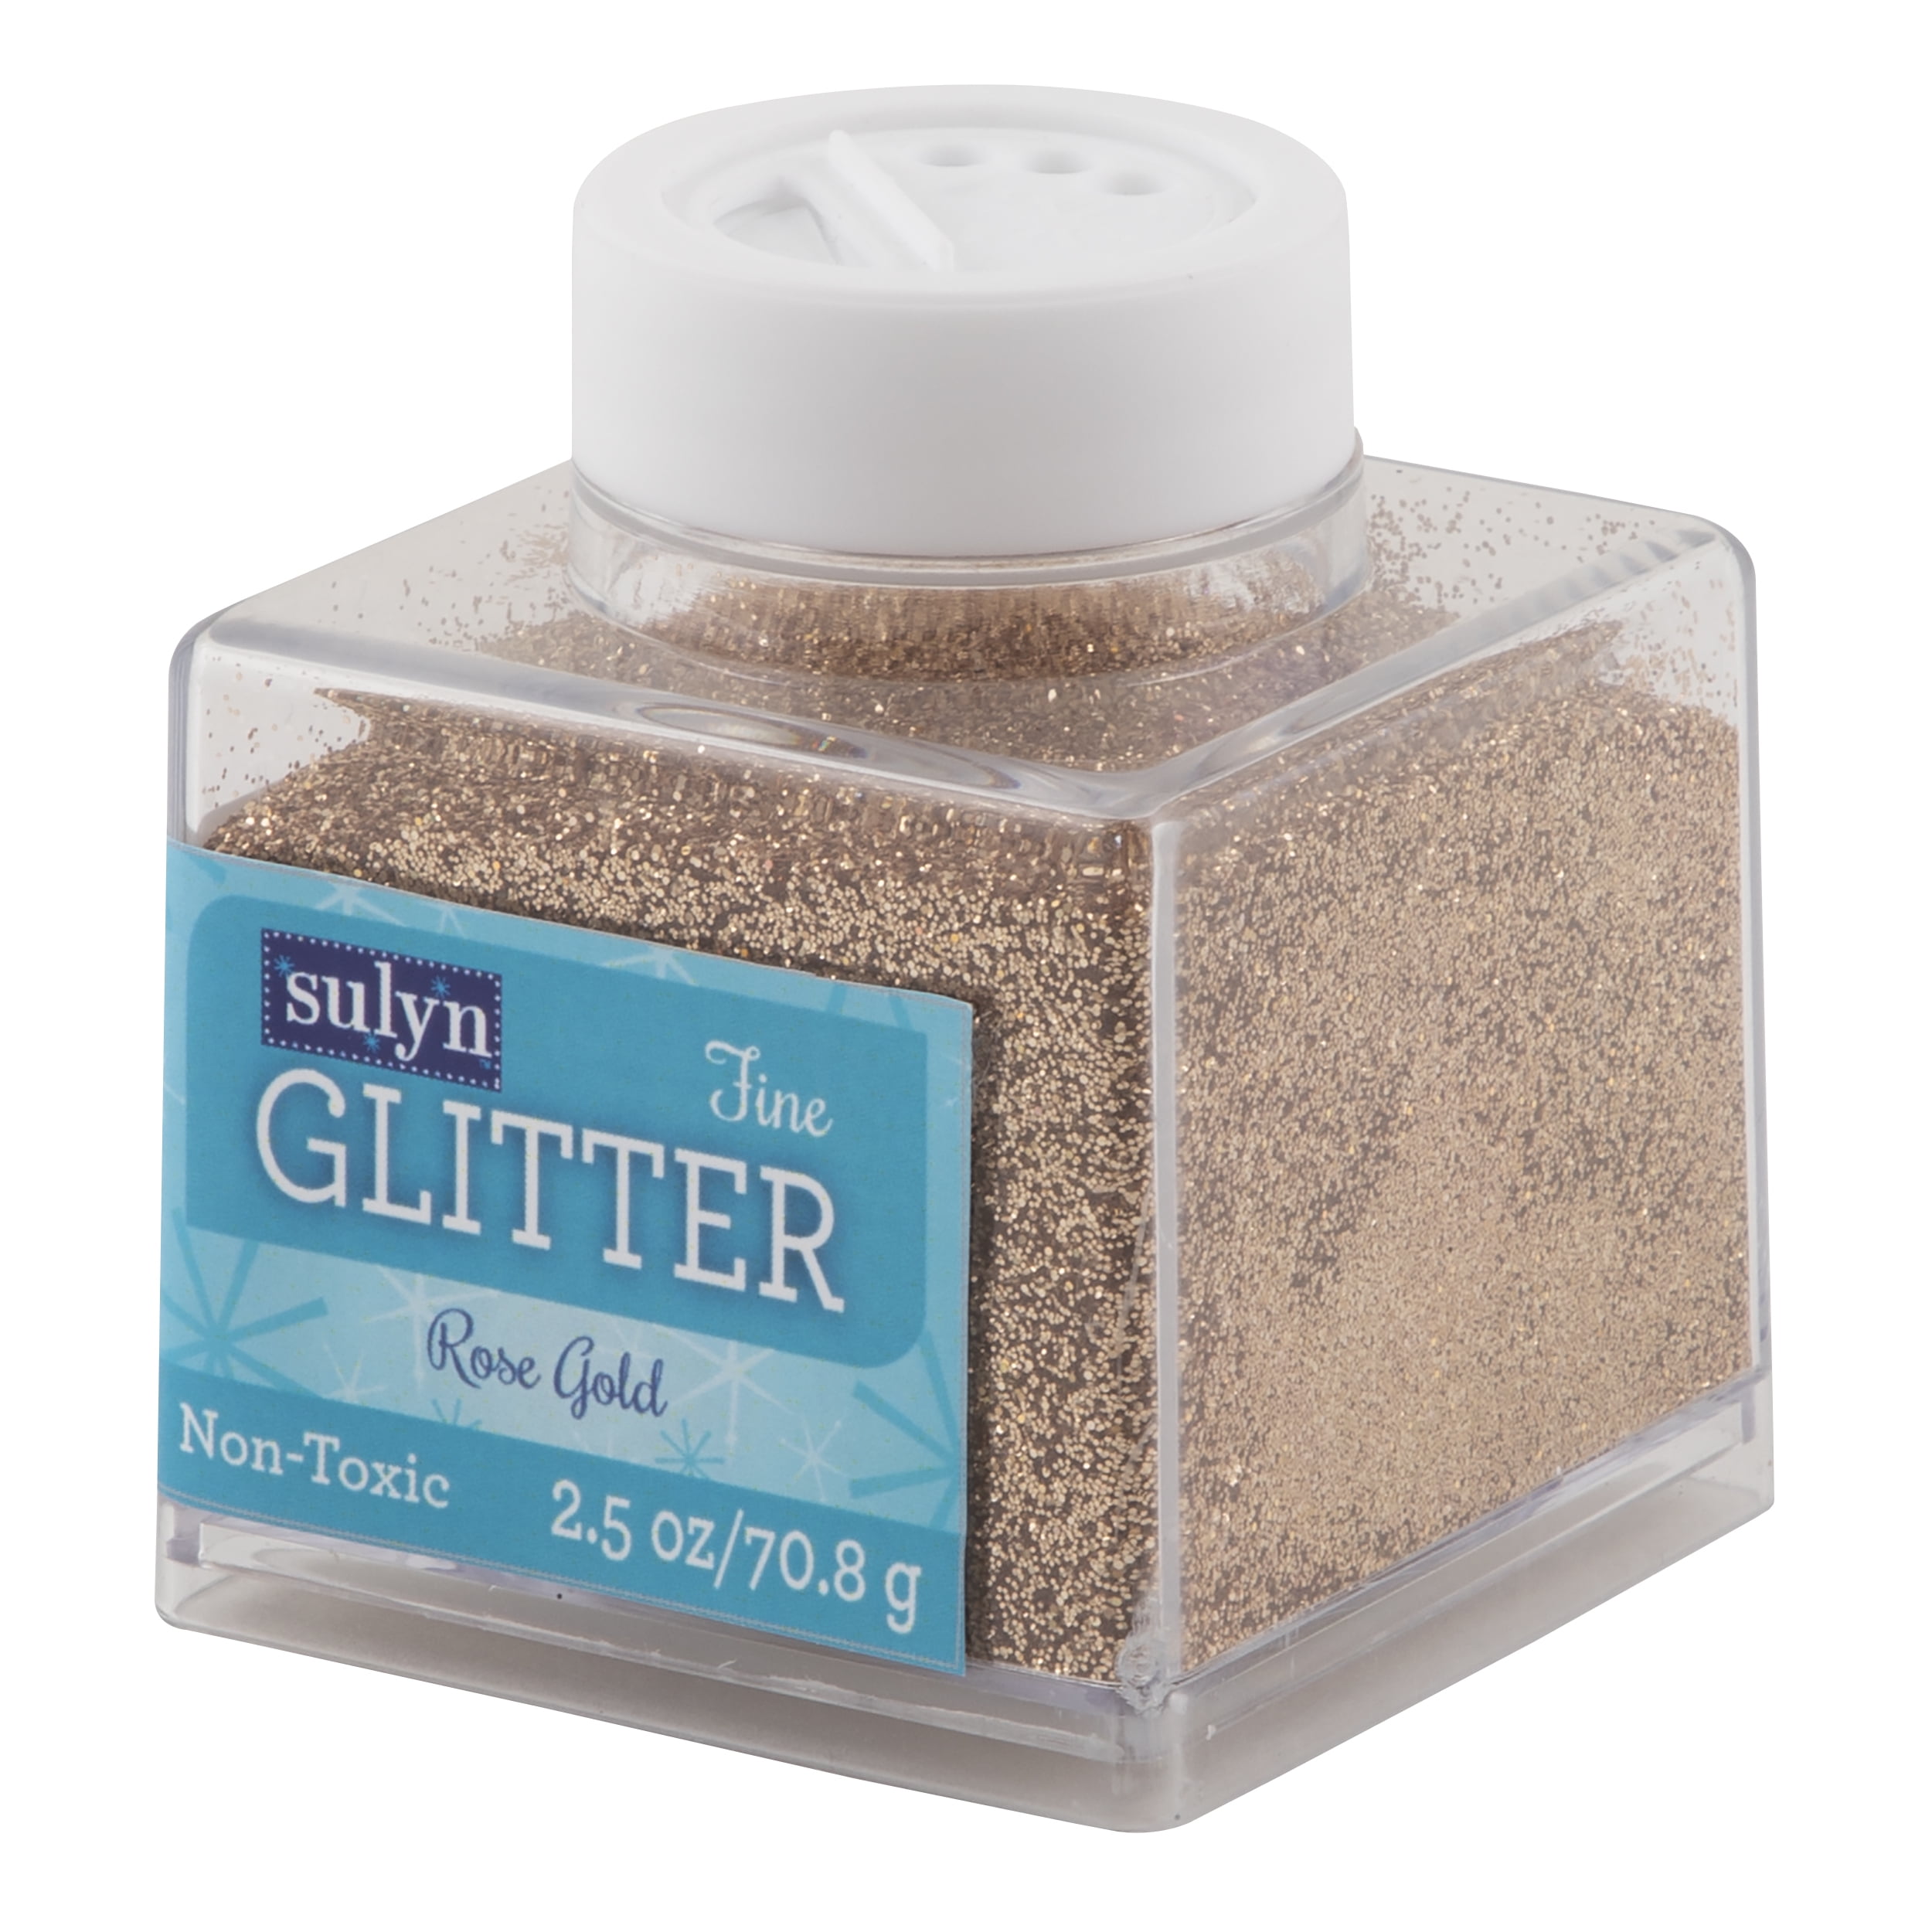 Buy 23 Grams Rose Gold Extra Fine Glitters  Craft Glitter Powder - Pack of  1 Bottle at Tablecloth Factory